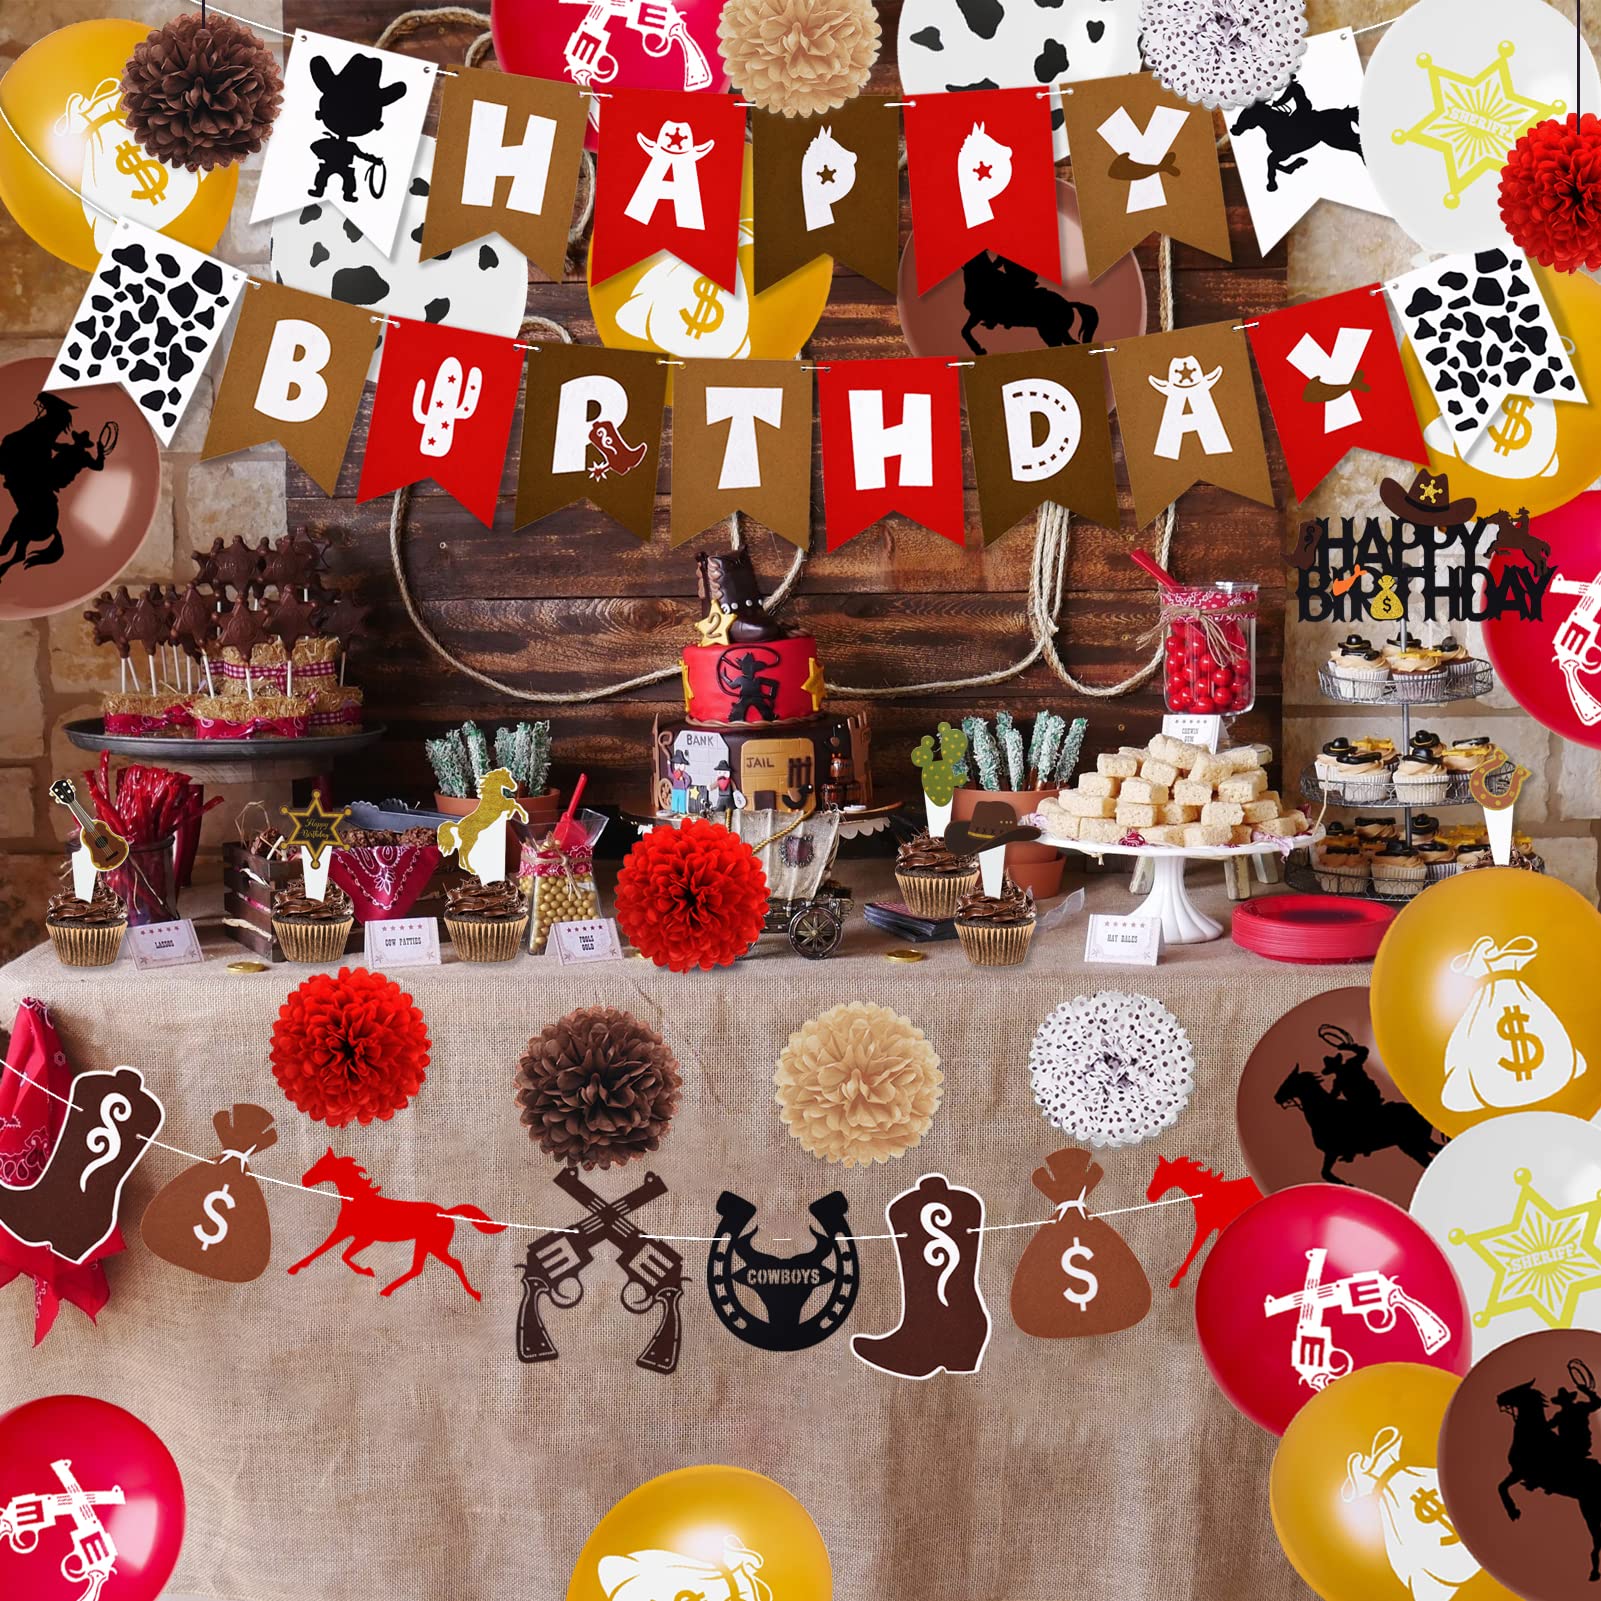 BORAMDO Western Cowboy Birthday Party Decoration Pack 59 Pcs, Cowboy Theme Party Supplies Include Happy Birthday Banner Horses Garland Cake Cupcake Toppers Paper Flowers Balloons Set for Western Party